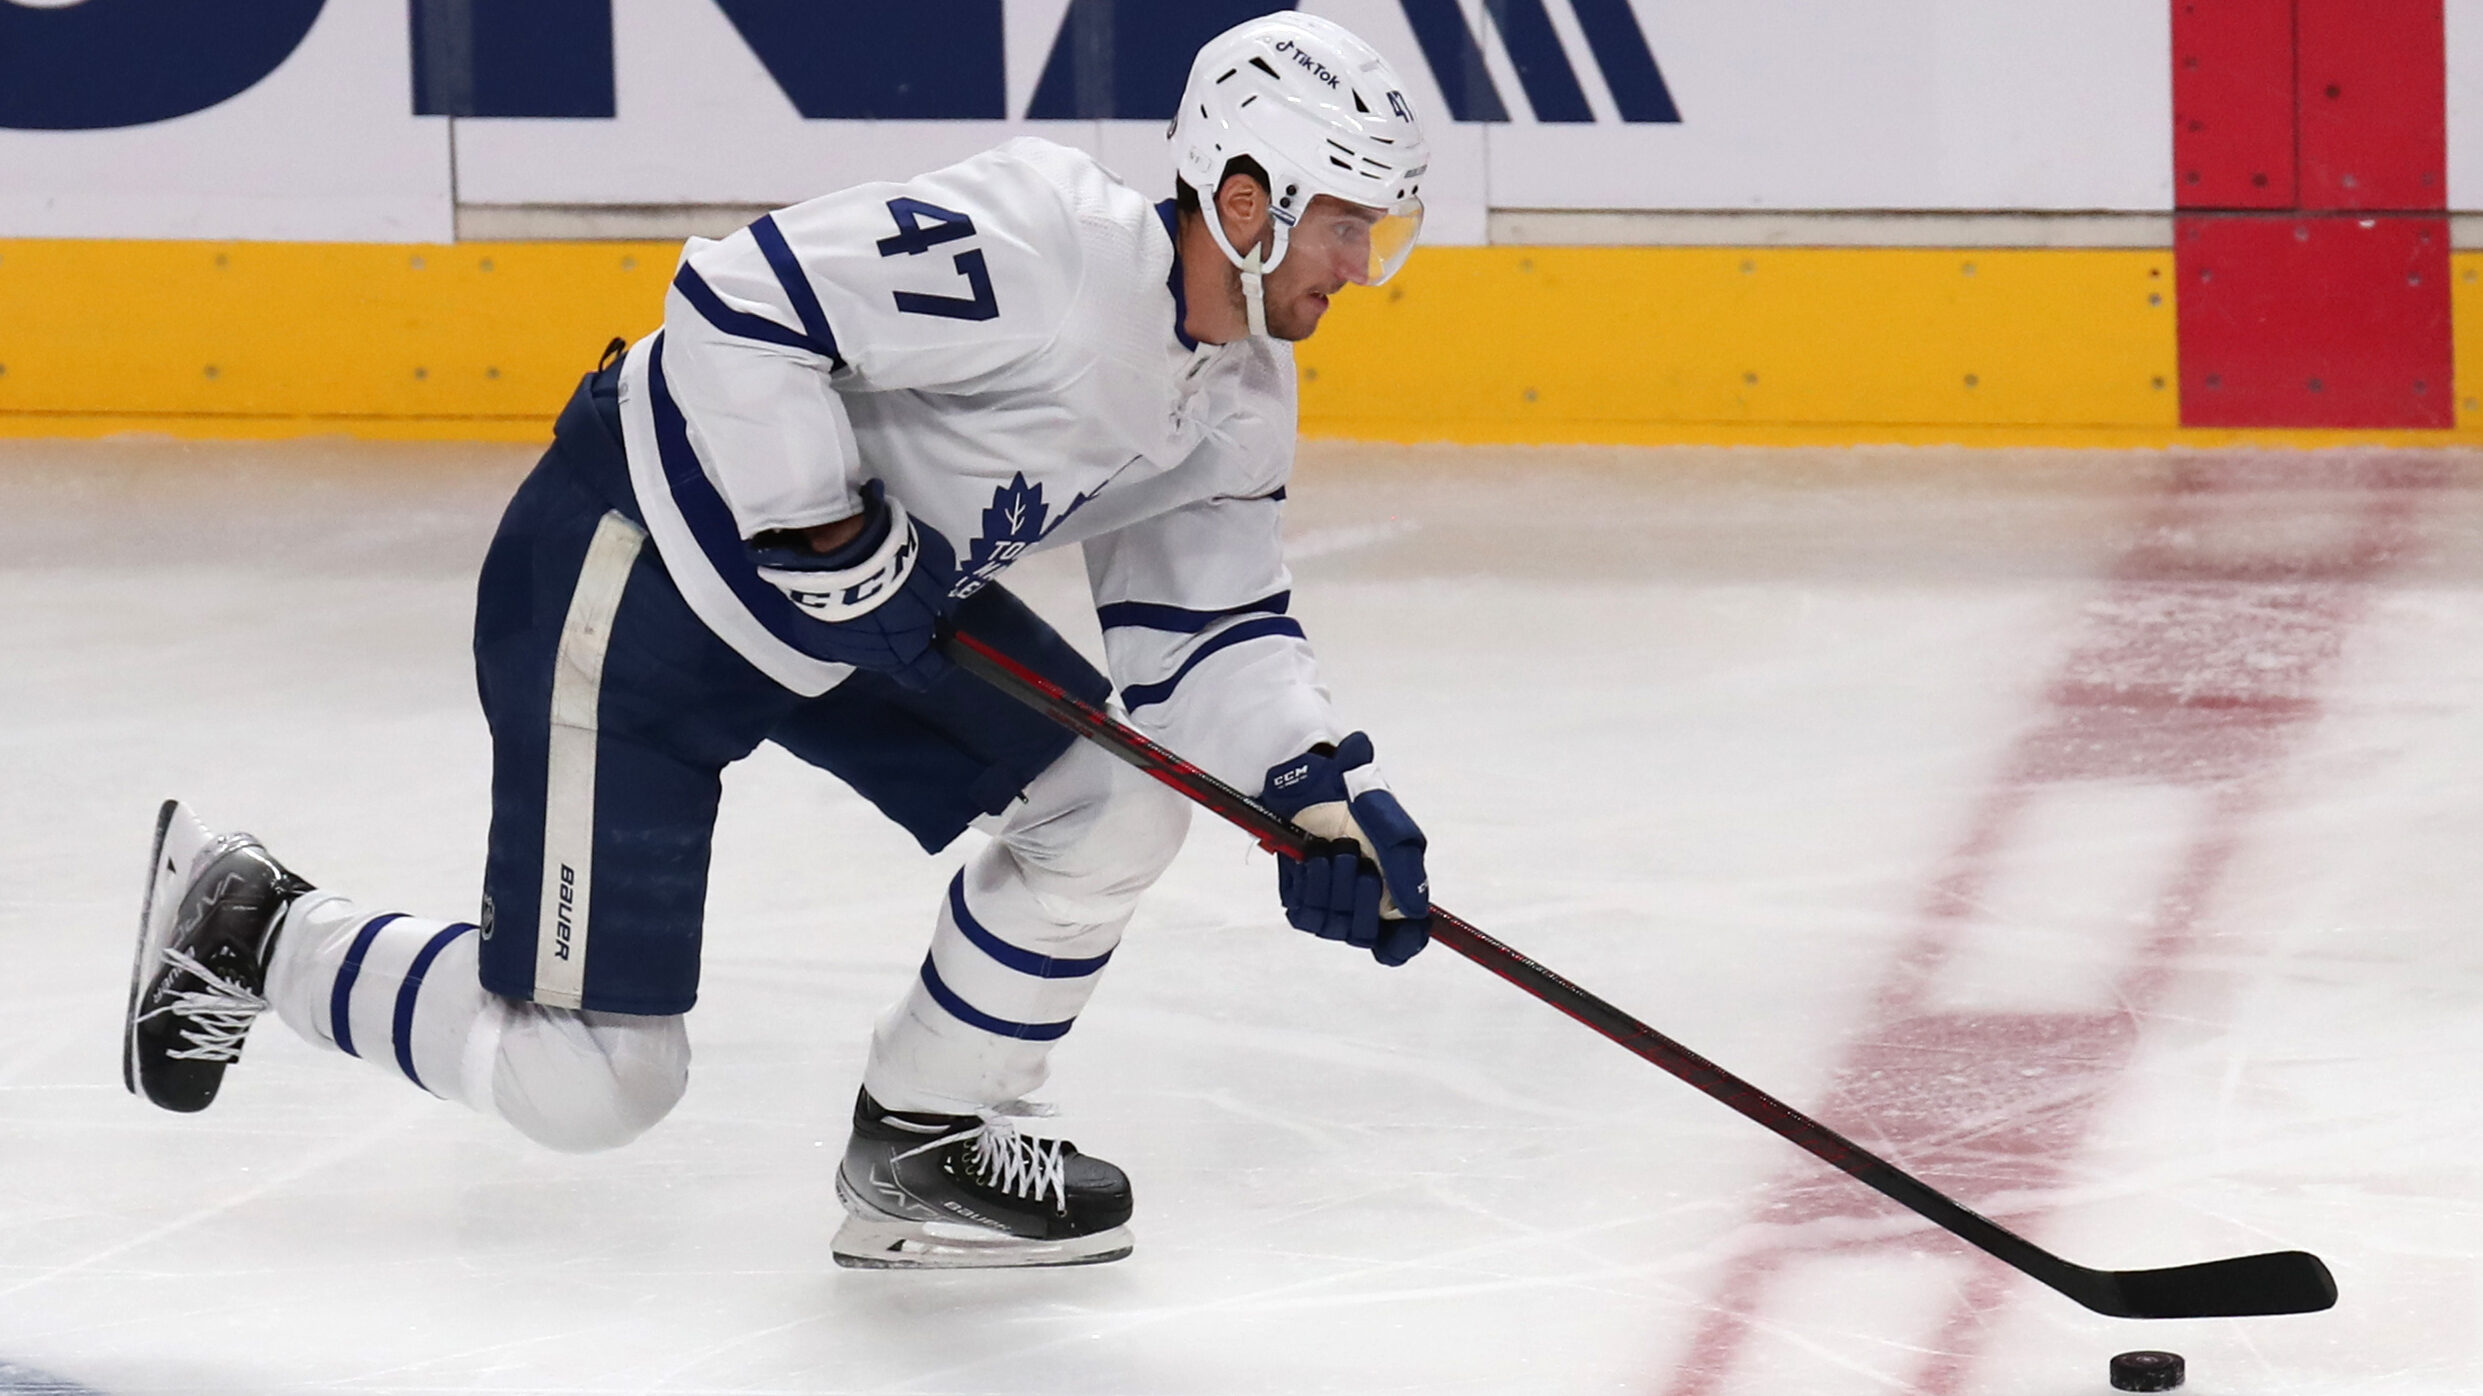 Pierre Engvall and Travis Dermott Join Morning Skate, Engvall in vs. Caps